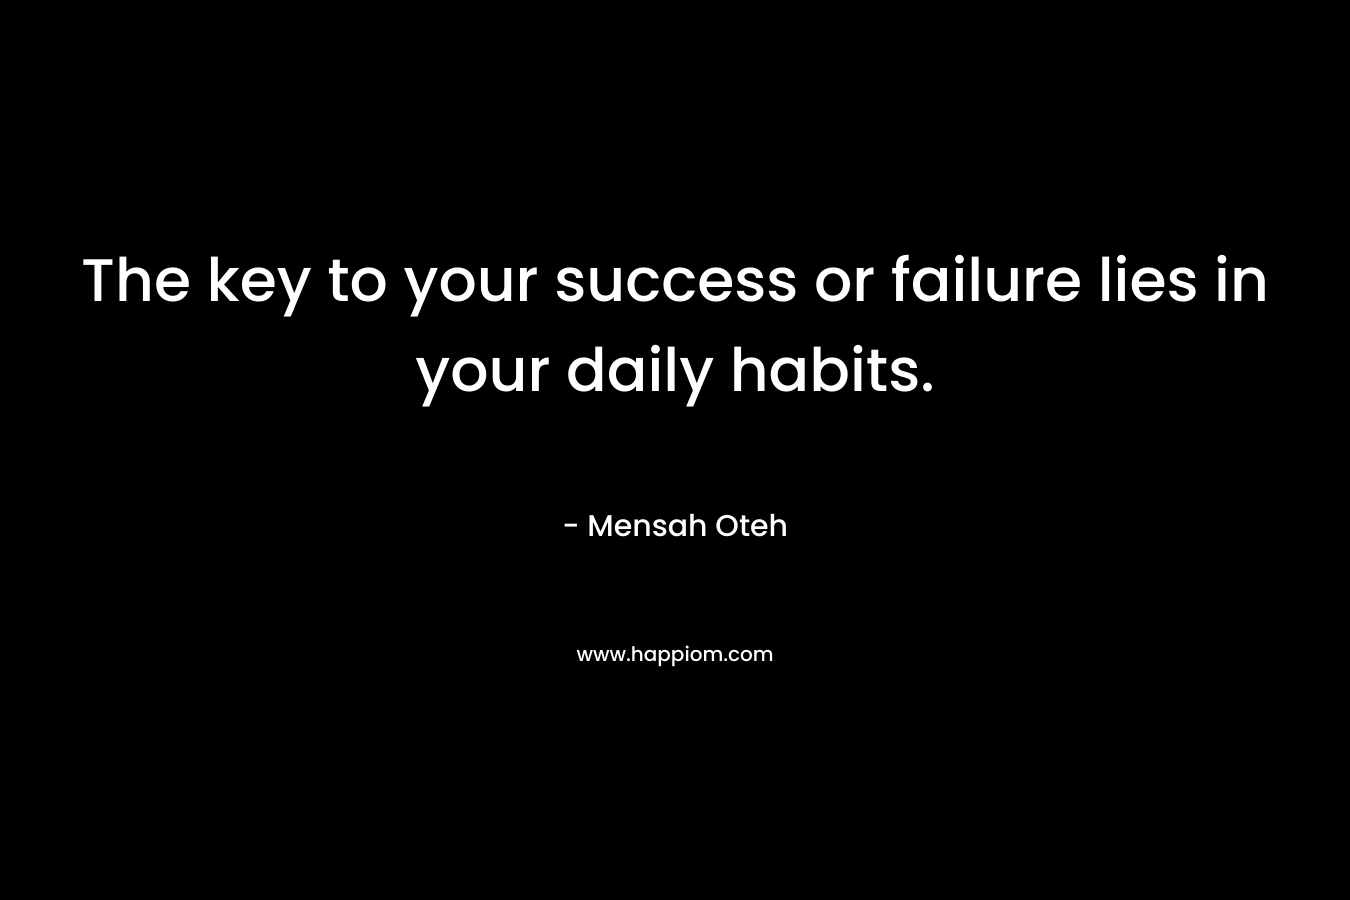 The key to your success or failure lies in your daily habits.